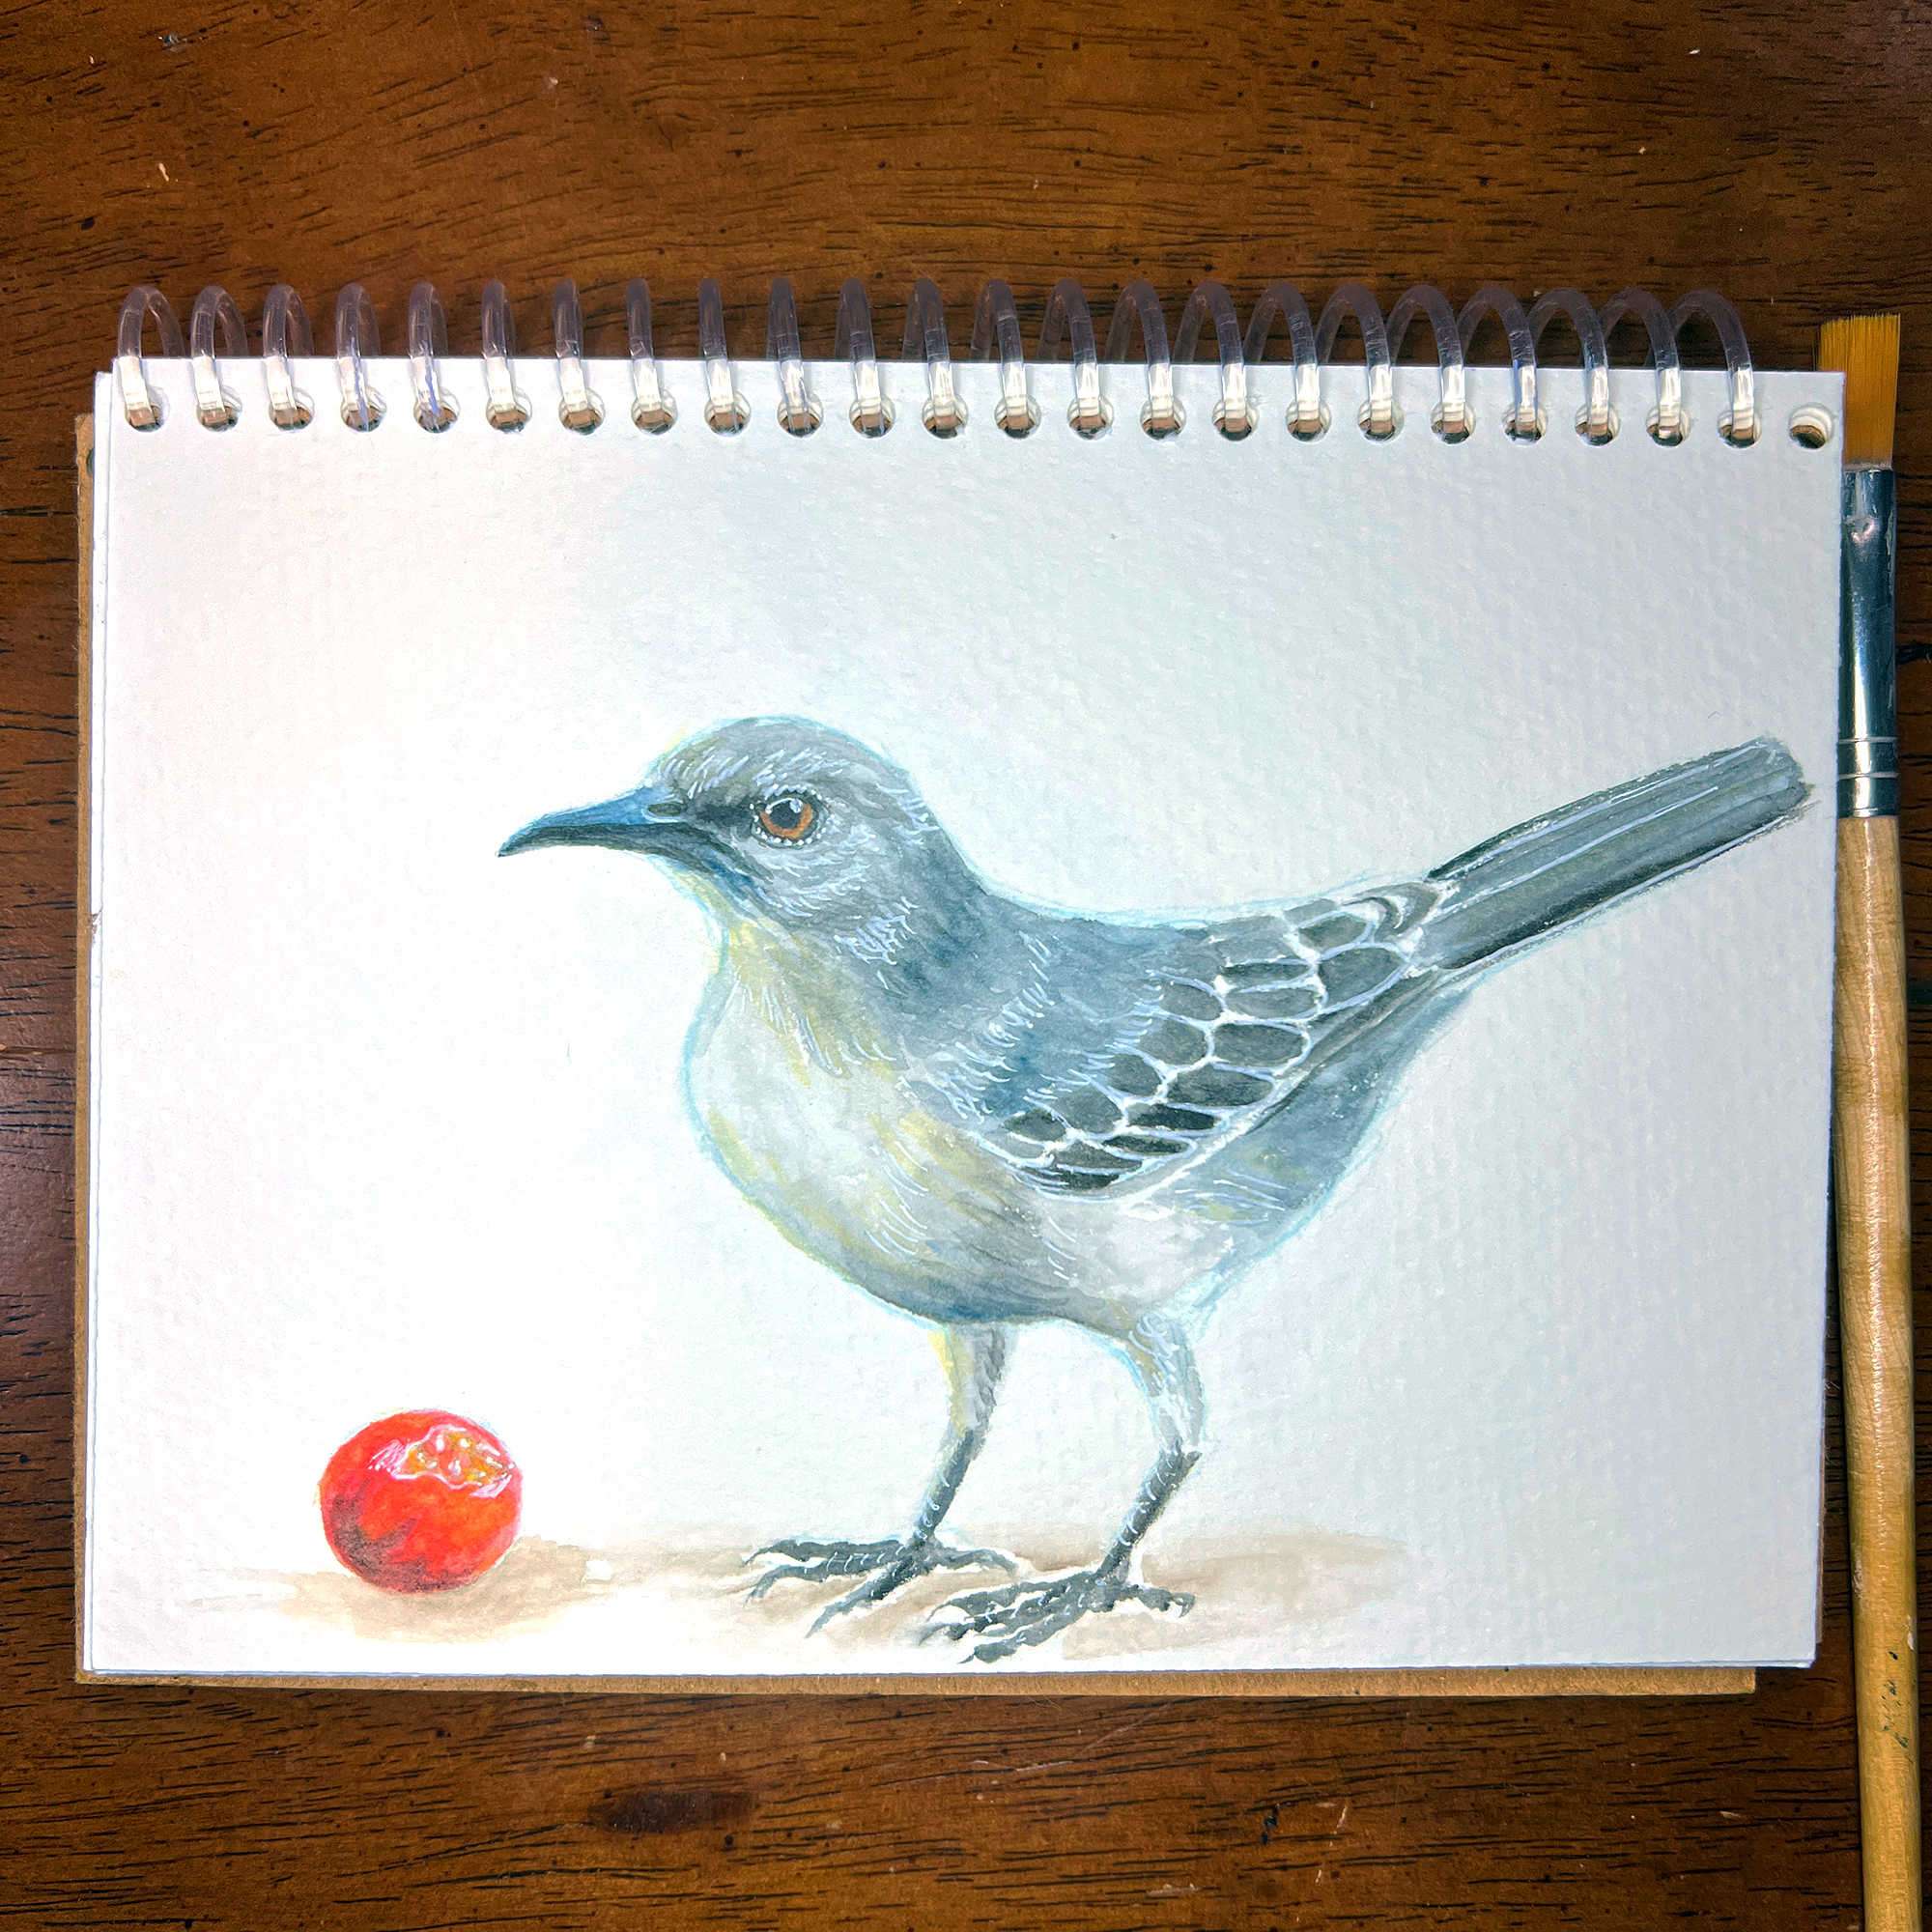 Mockingbird painting on a sketchpad beside a pencil, capturing its poised stance.